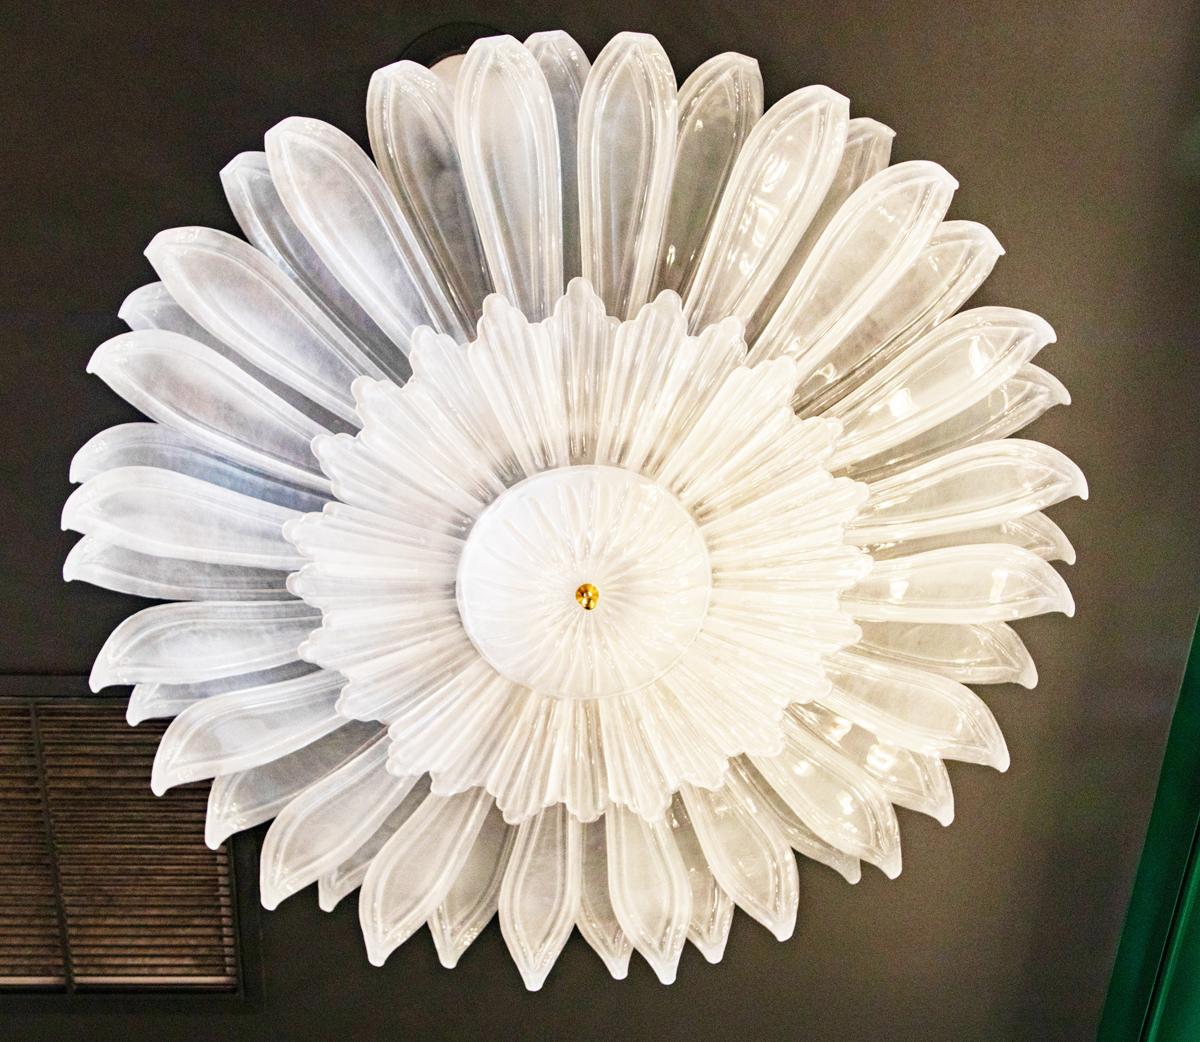 Large Murano glass flush mount flower shaped chandelier, in Stock
Two tiers of frosted glass petals that emanates from a central finial. 
Pair available 
Available to ship now from our Miami gallery
Rewired to US standard